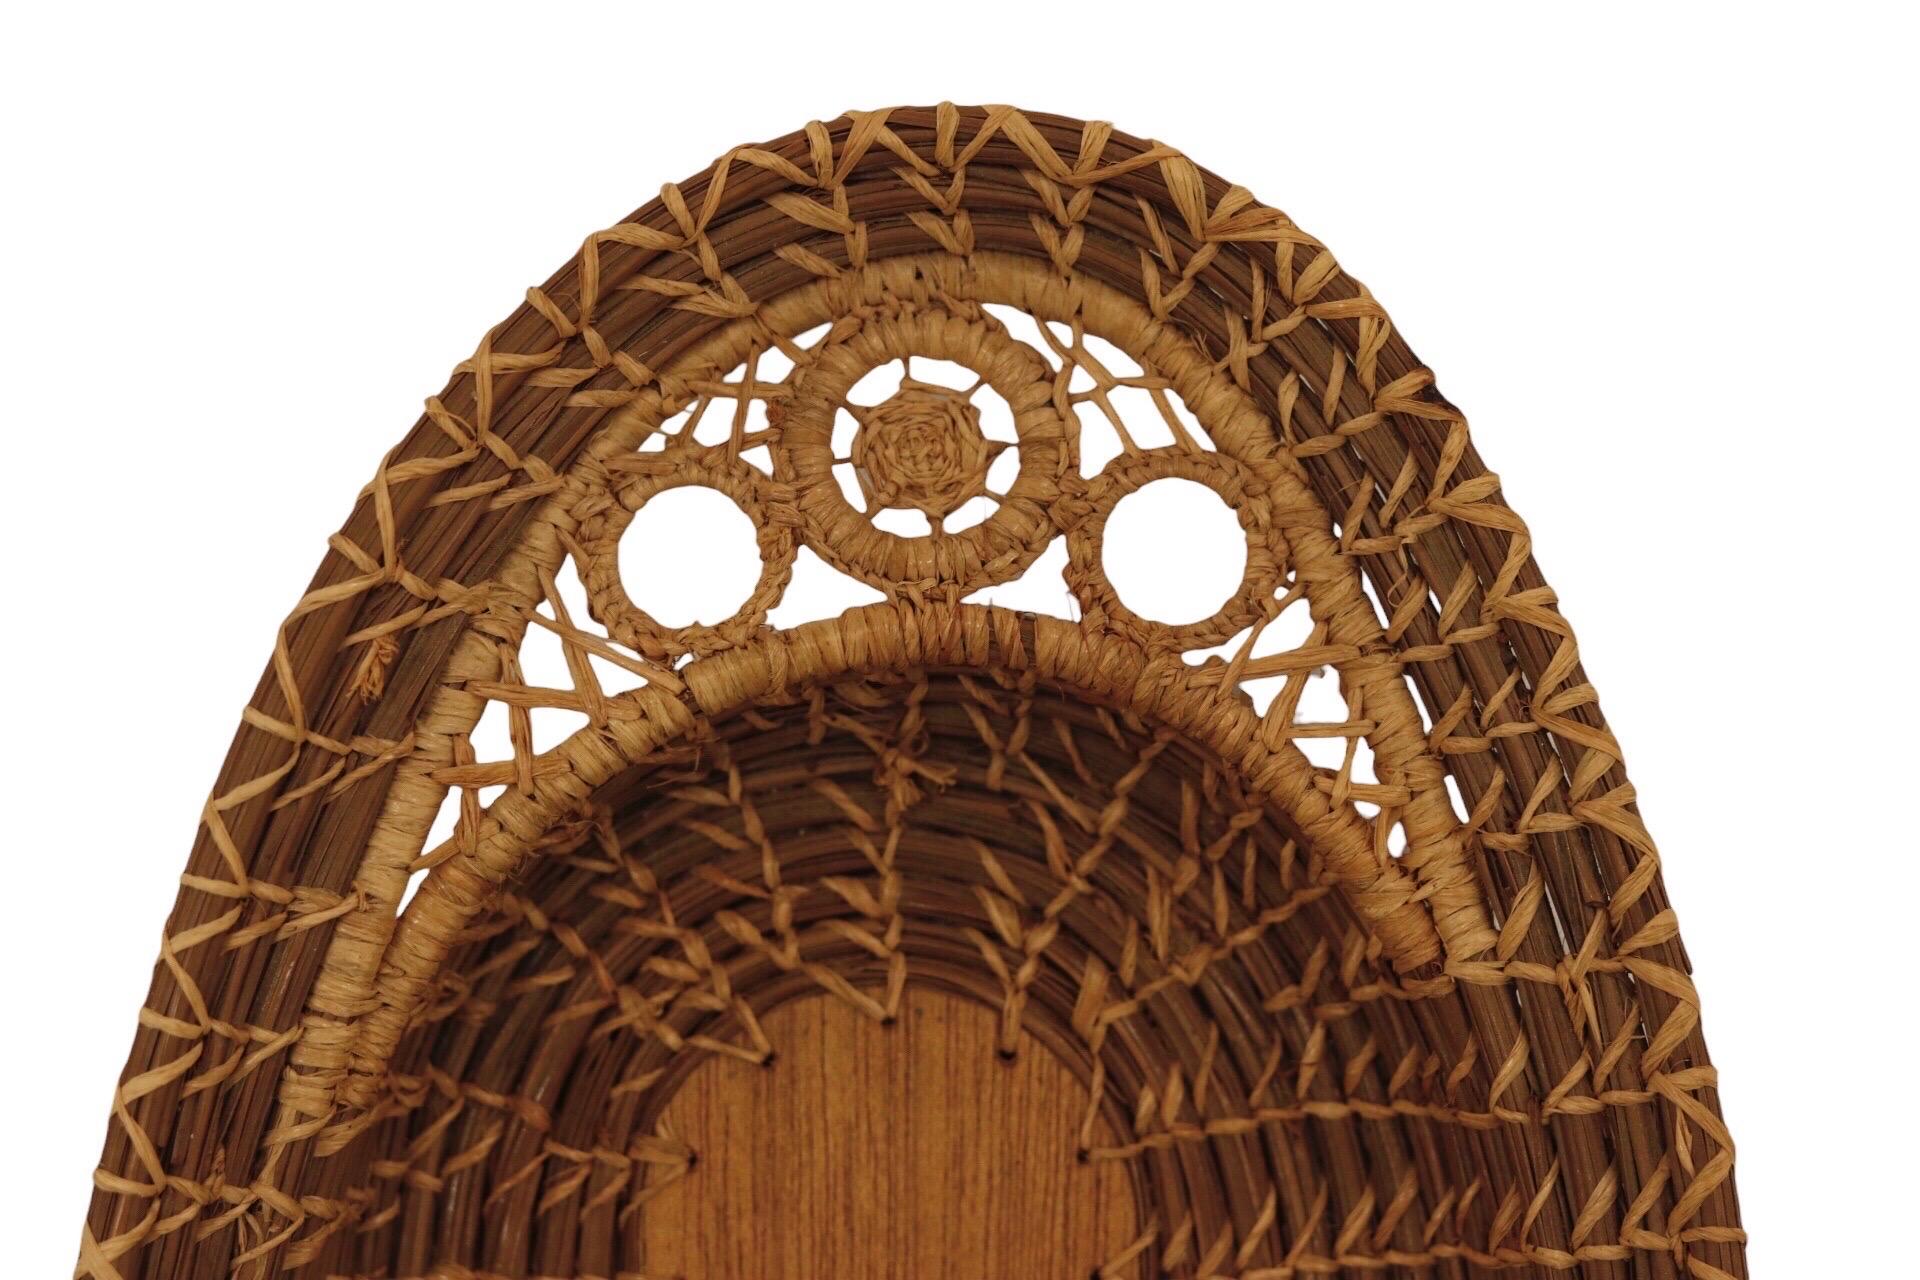 Rattan & Pine Needle Serving Trays - Set of 2 For Sale 1